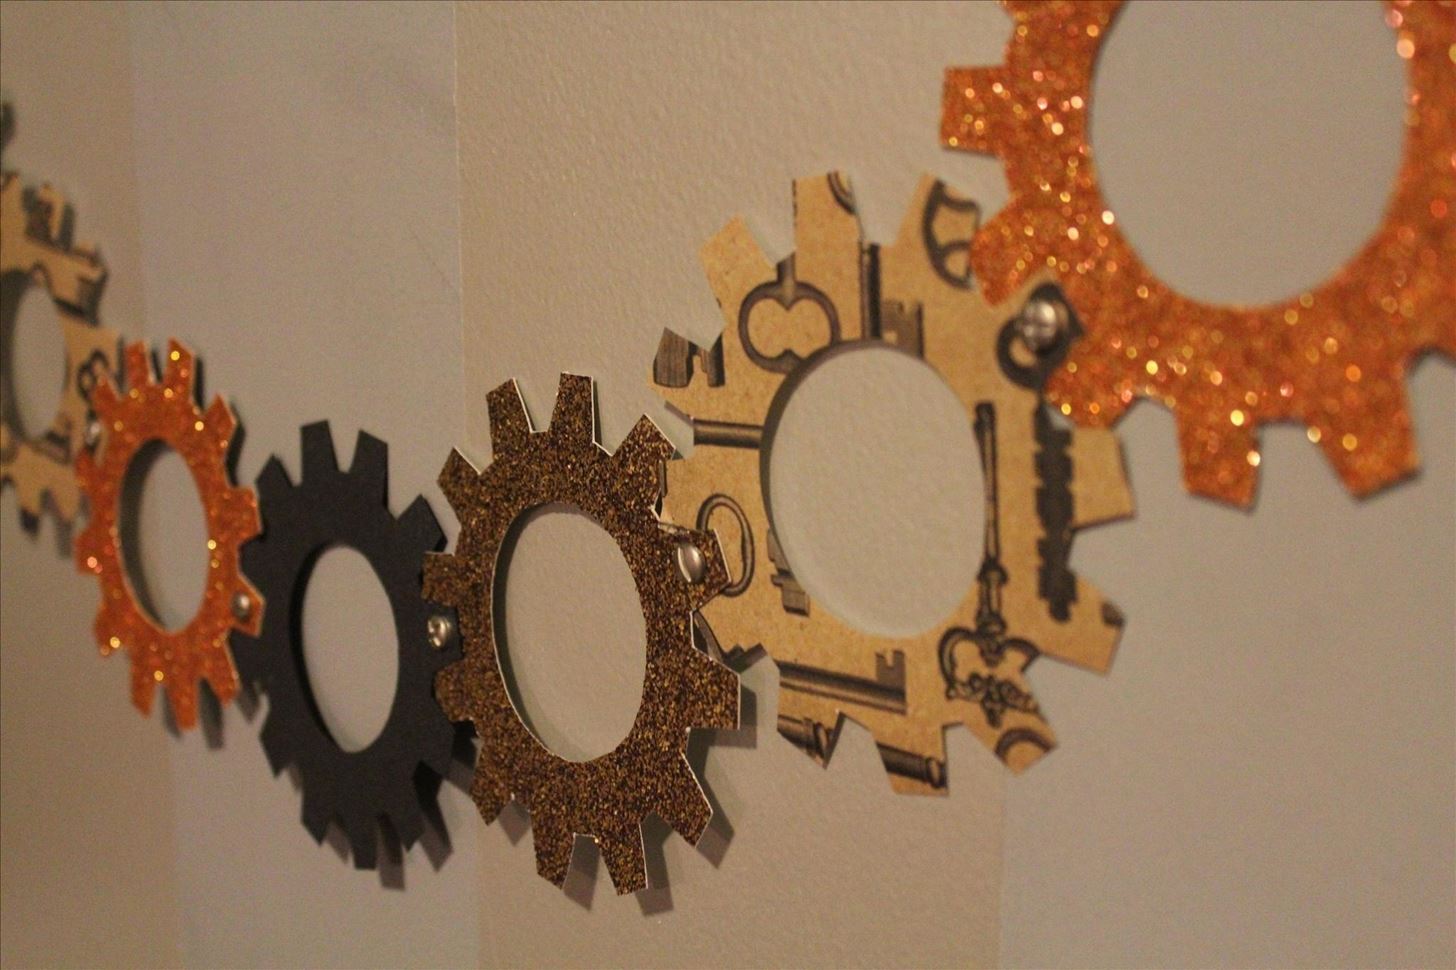 Steampunk Your Halloween Decorations with These DIY Interlocking Paper Gears